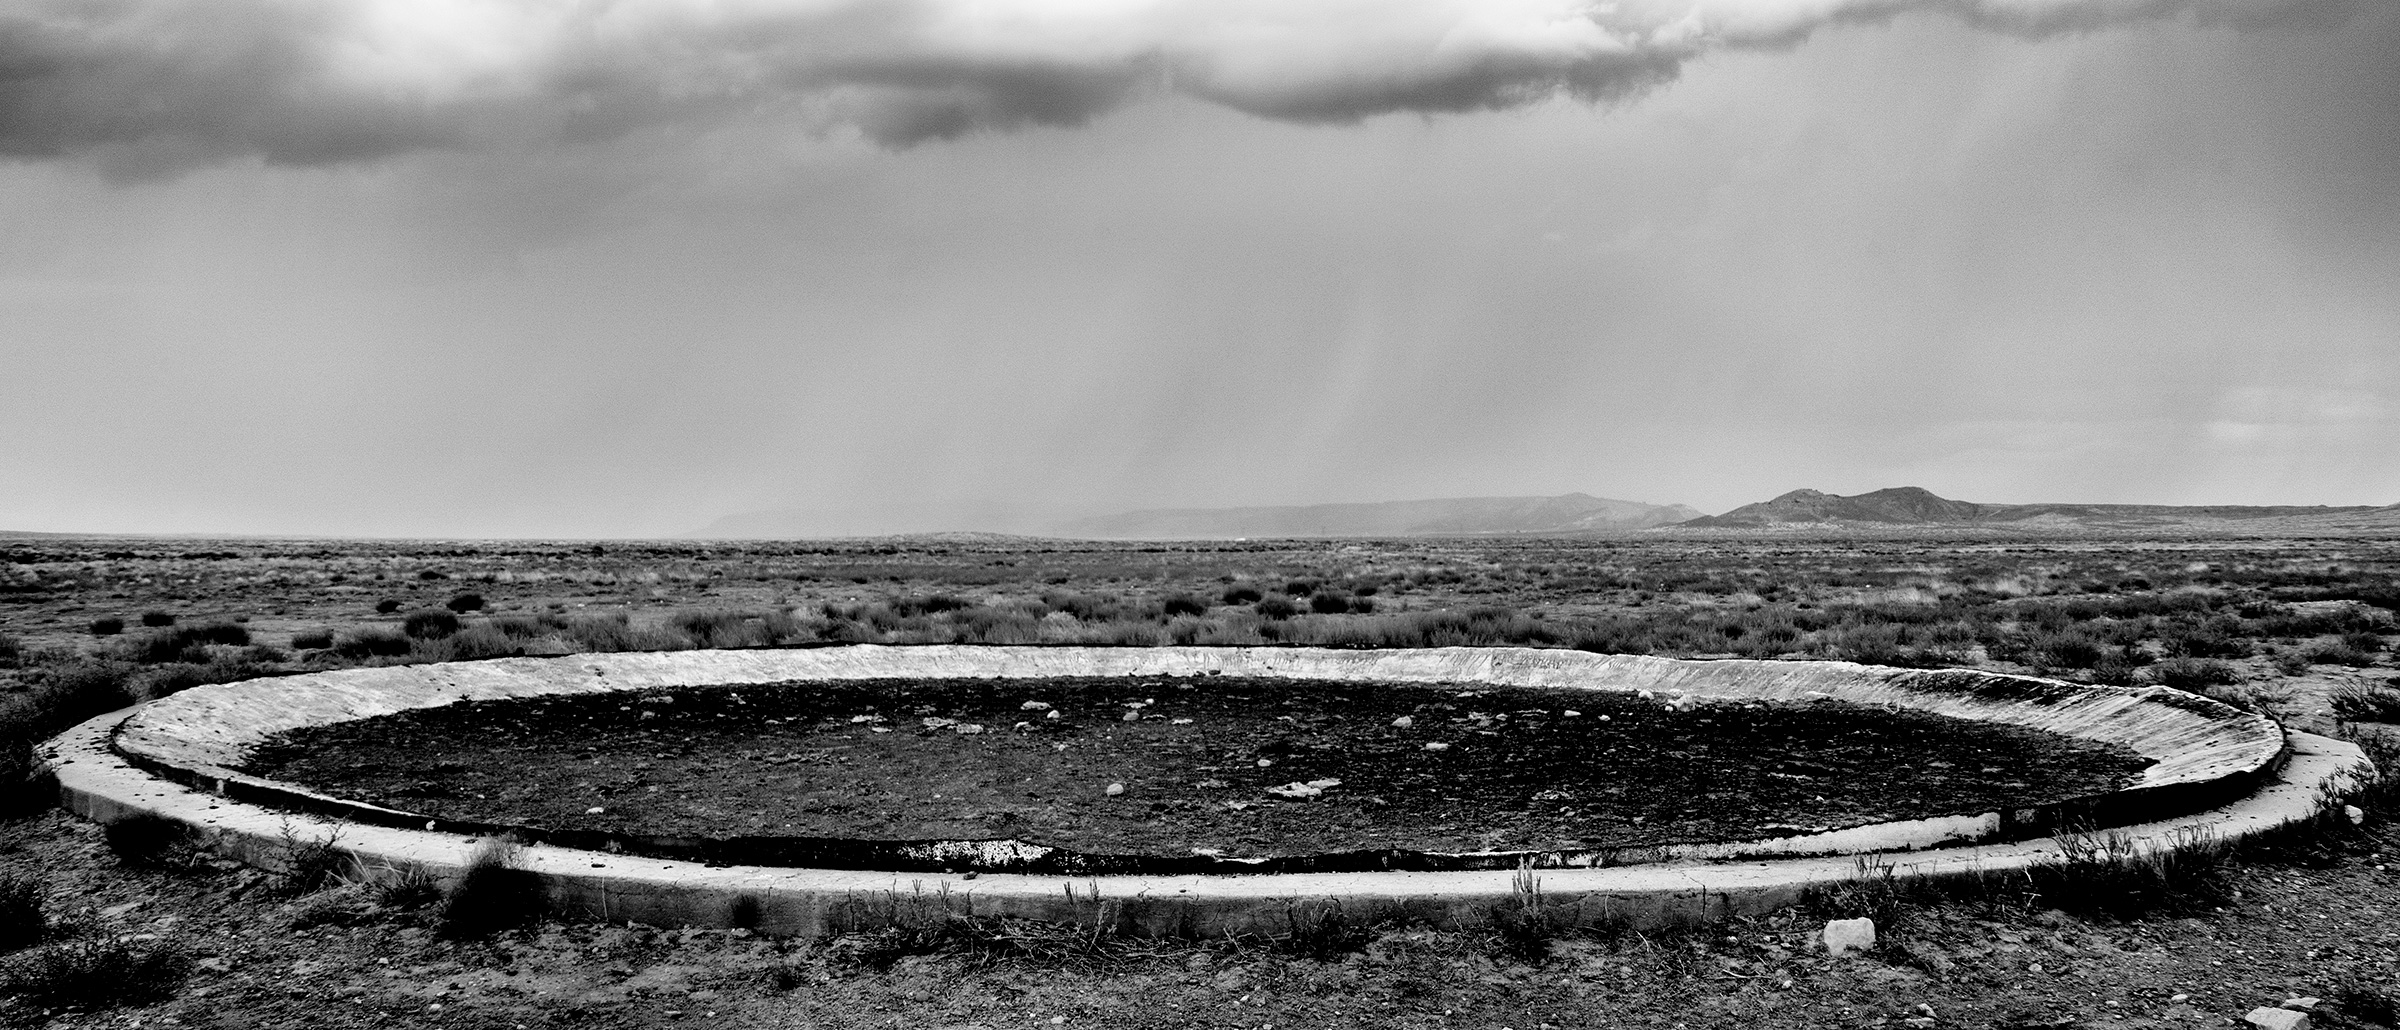 The <a href="https://time.com/longform/clean-water-access-united-states/" target="_blank" rel="noopener noreferrer">remains of a water­-storage tank</a>, razed because of uranium contamination, in Red Mesa, Ariz.; for decades during the Cold War, mines in the Navajo Nation produced the uranium used for nuclear weapons. (Matt Black—Magnum Photos for TIME)